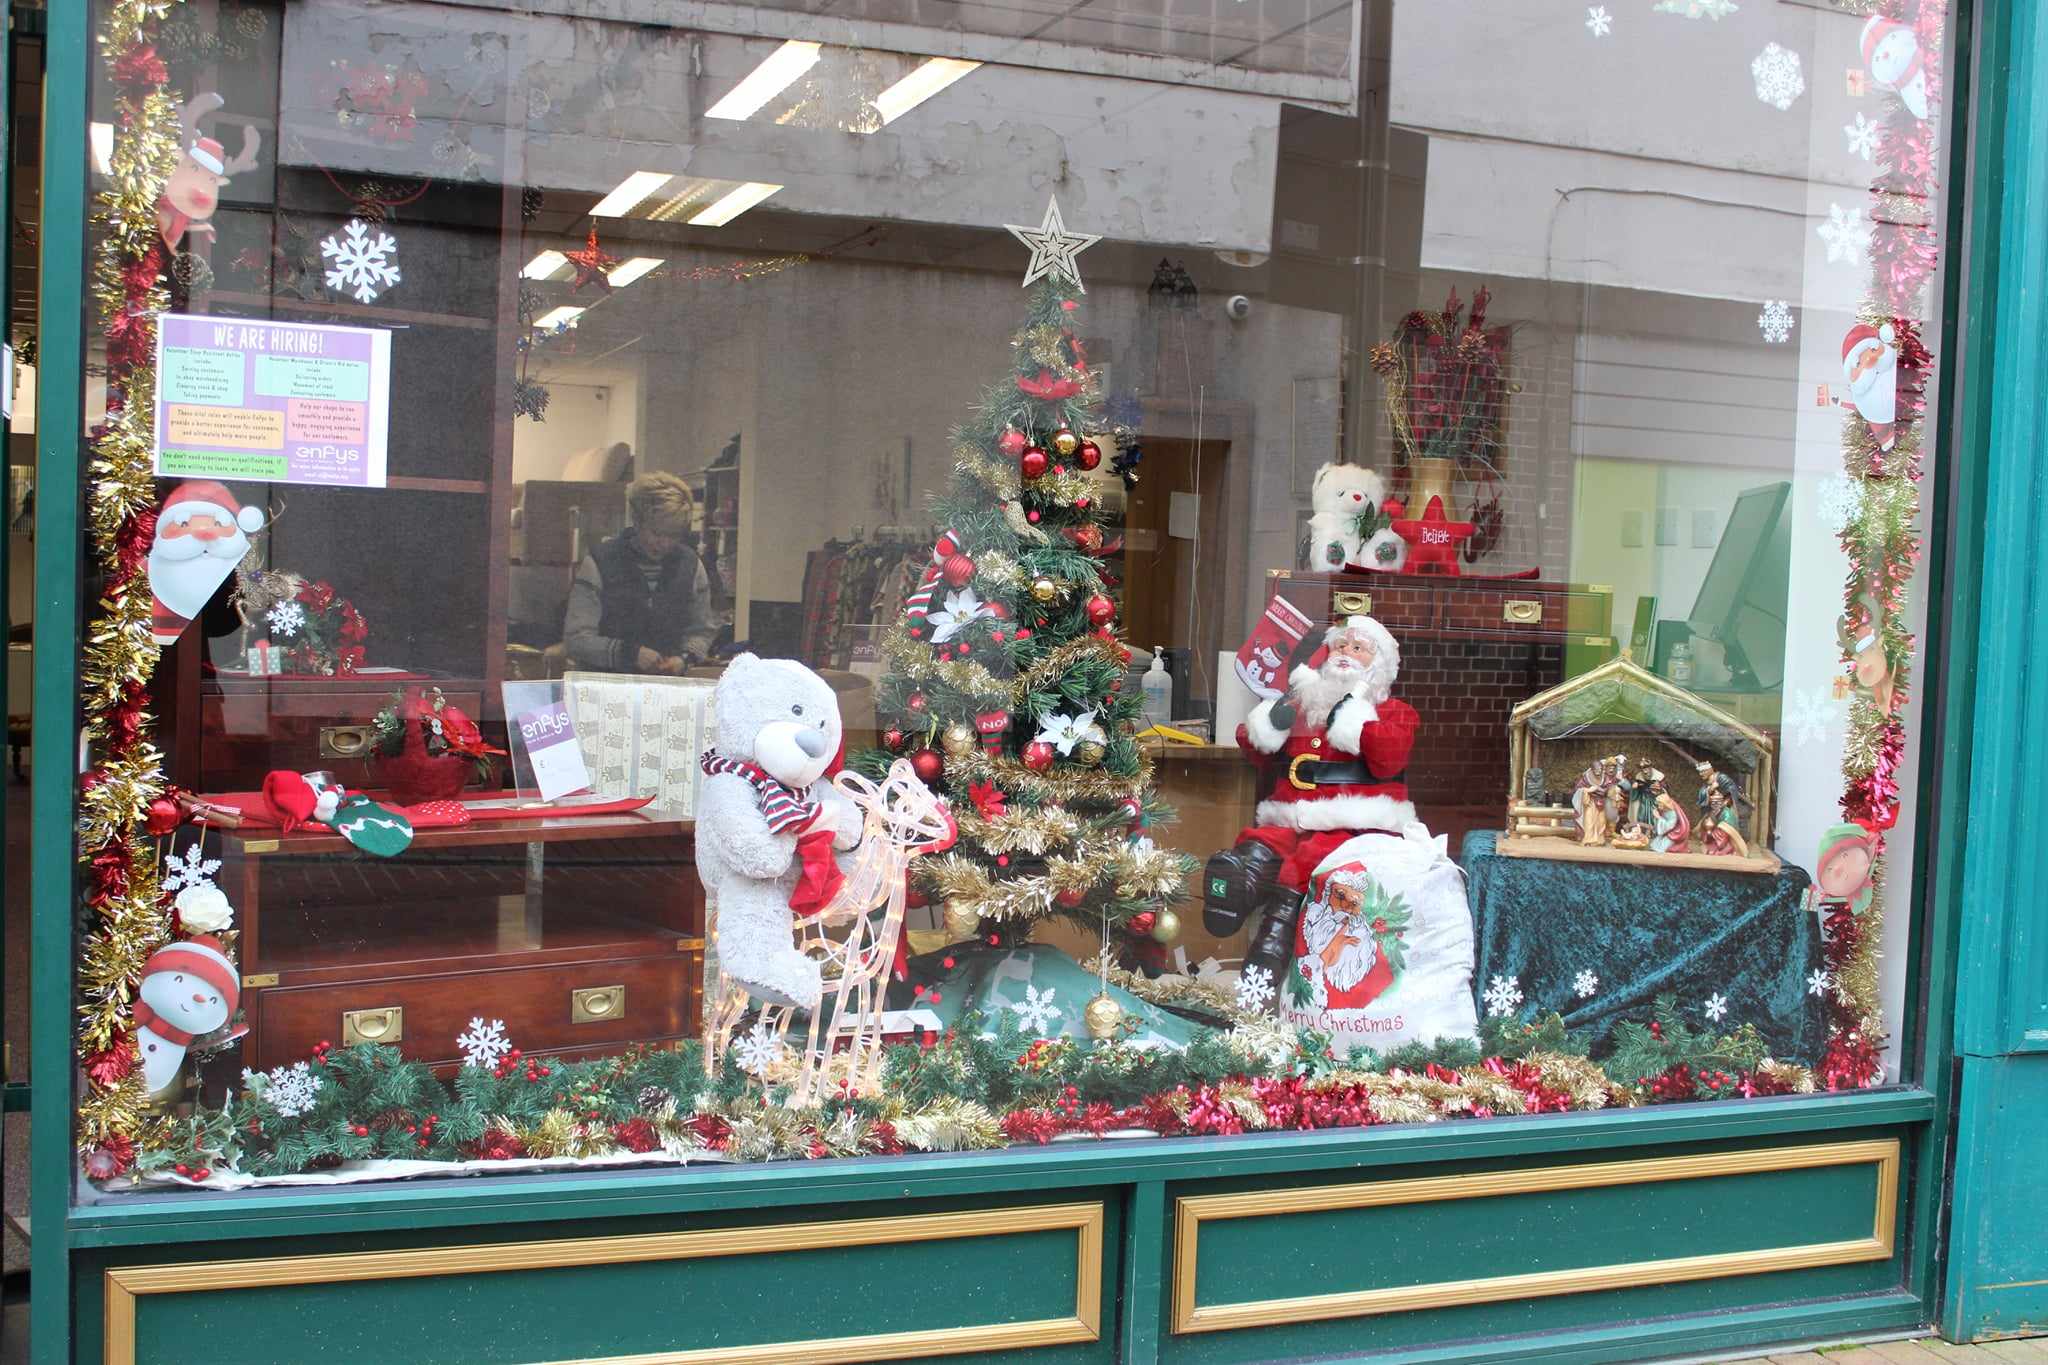 Enfys shop window with Christmas tree, santa and snowman, with christmas decorations around